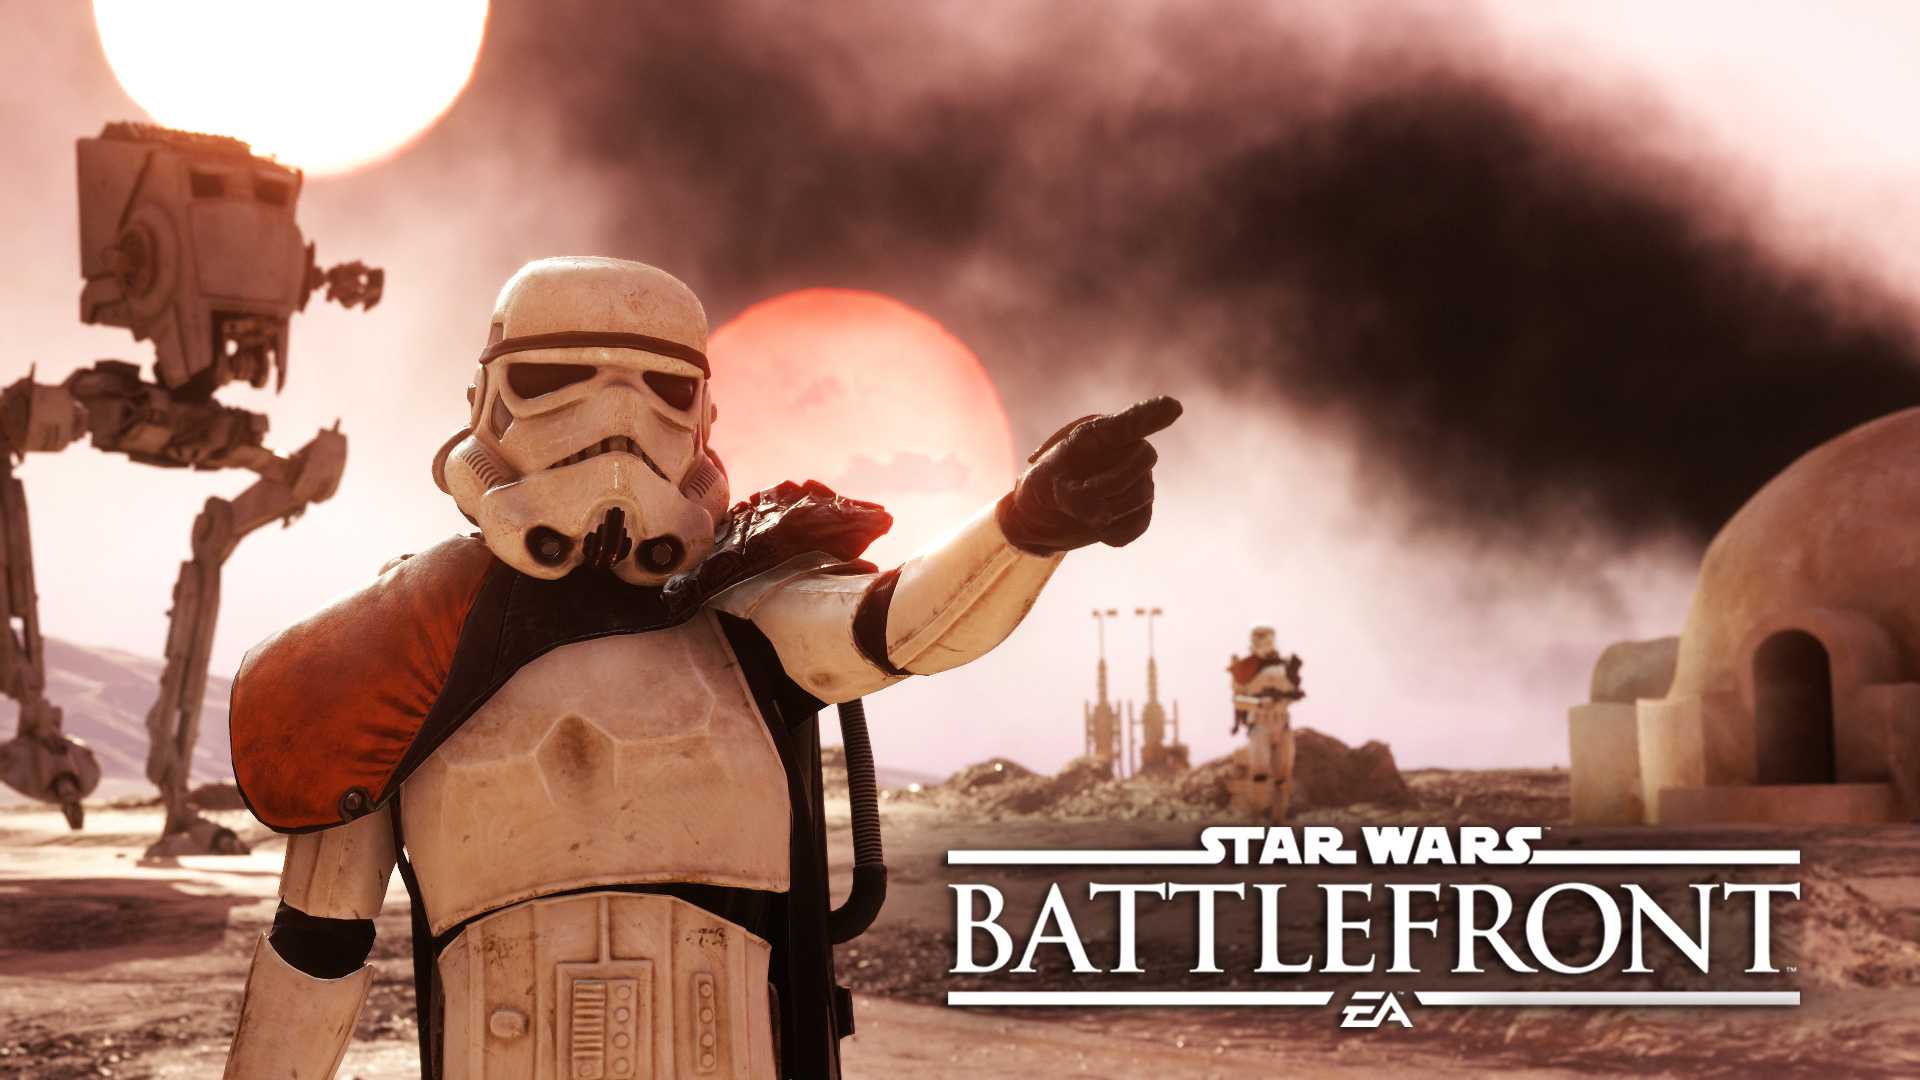 Five Things To Do In Star Wars Battlefront